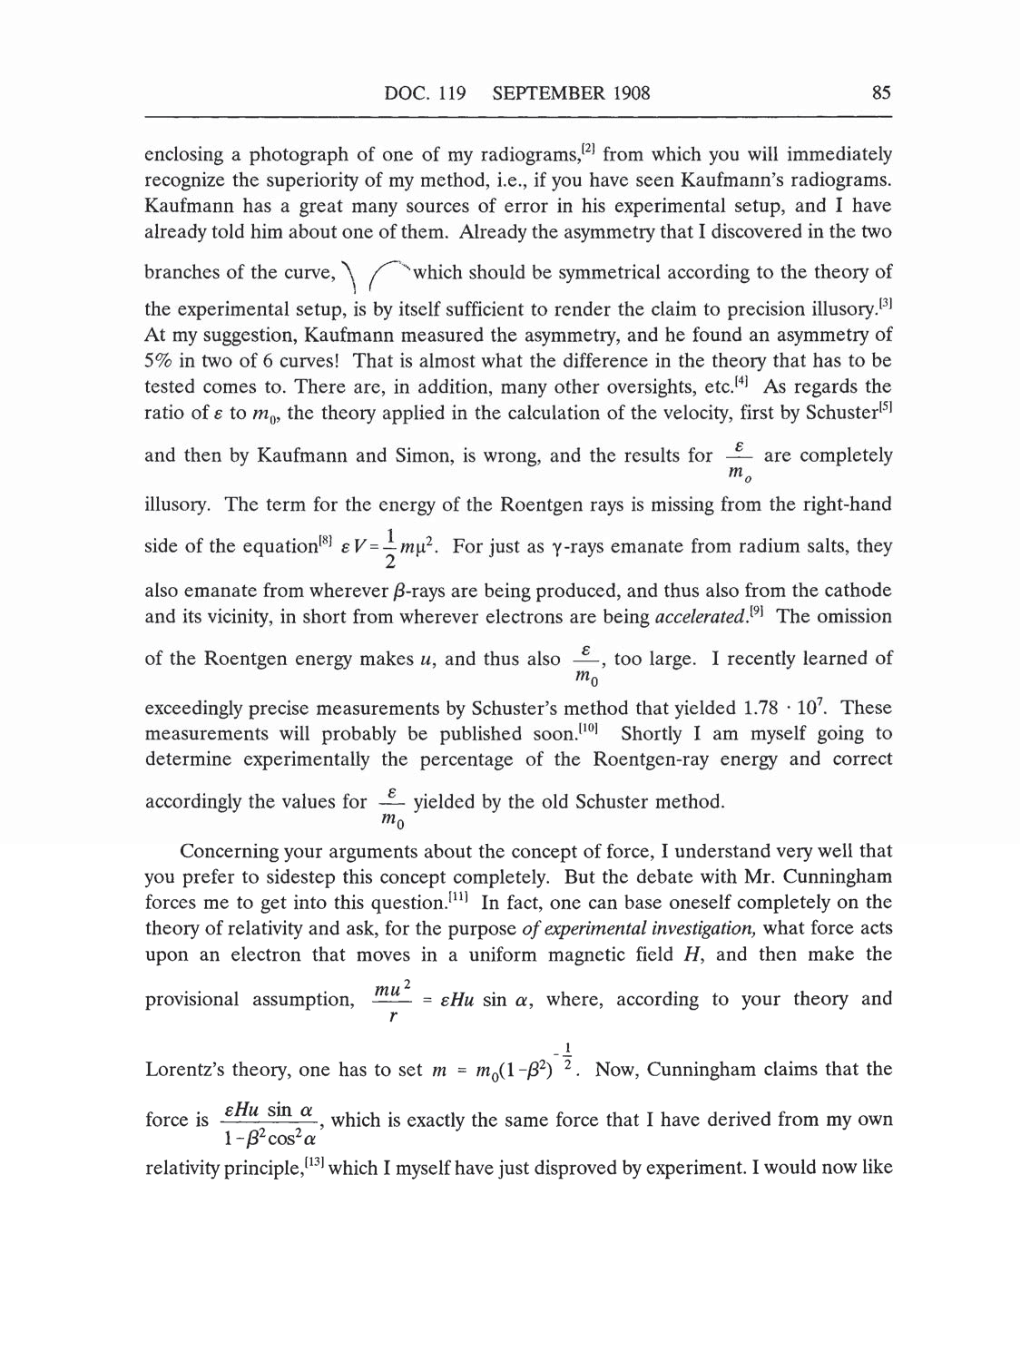 Volume 5: The Swiss Years: Correspondence, 1902-1914 (English translation supplement) page 85